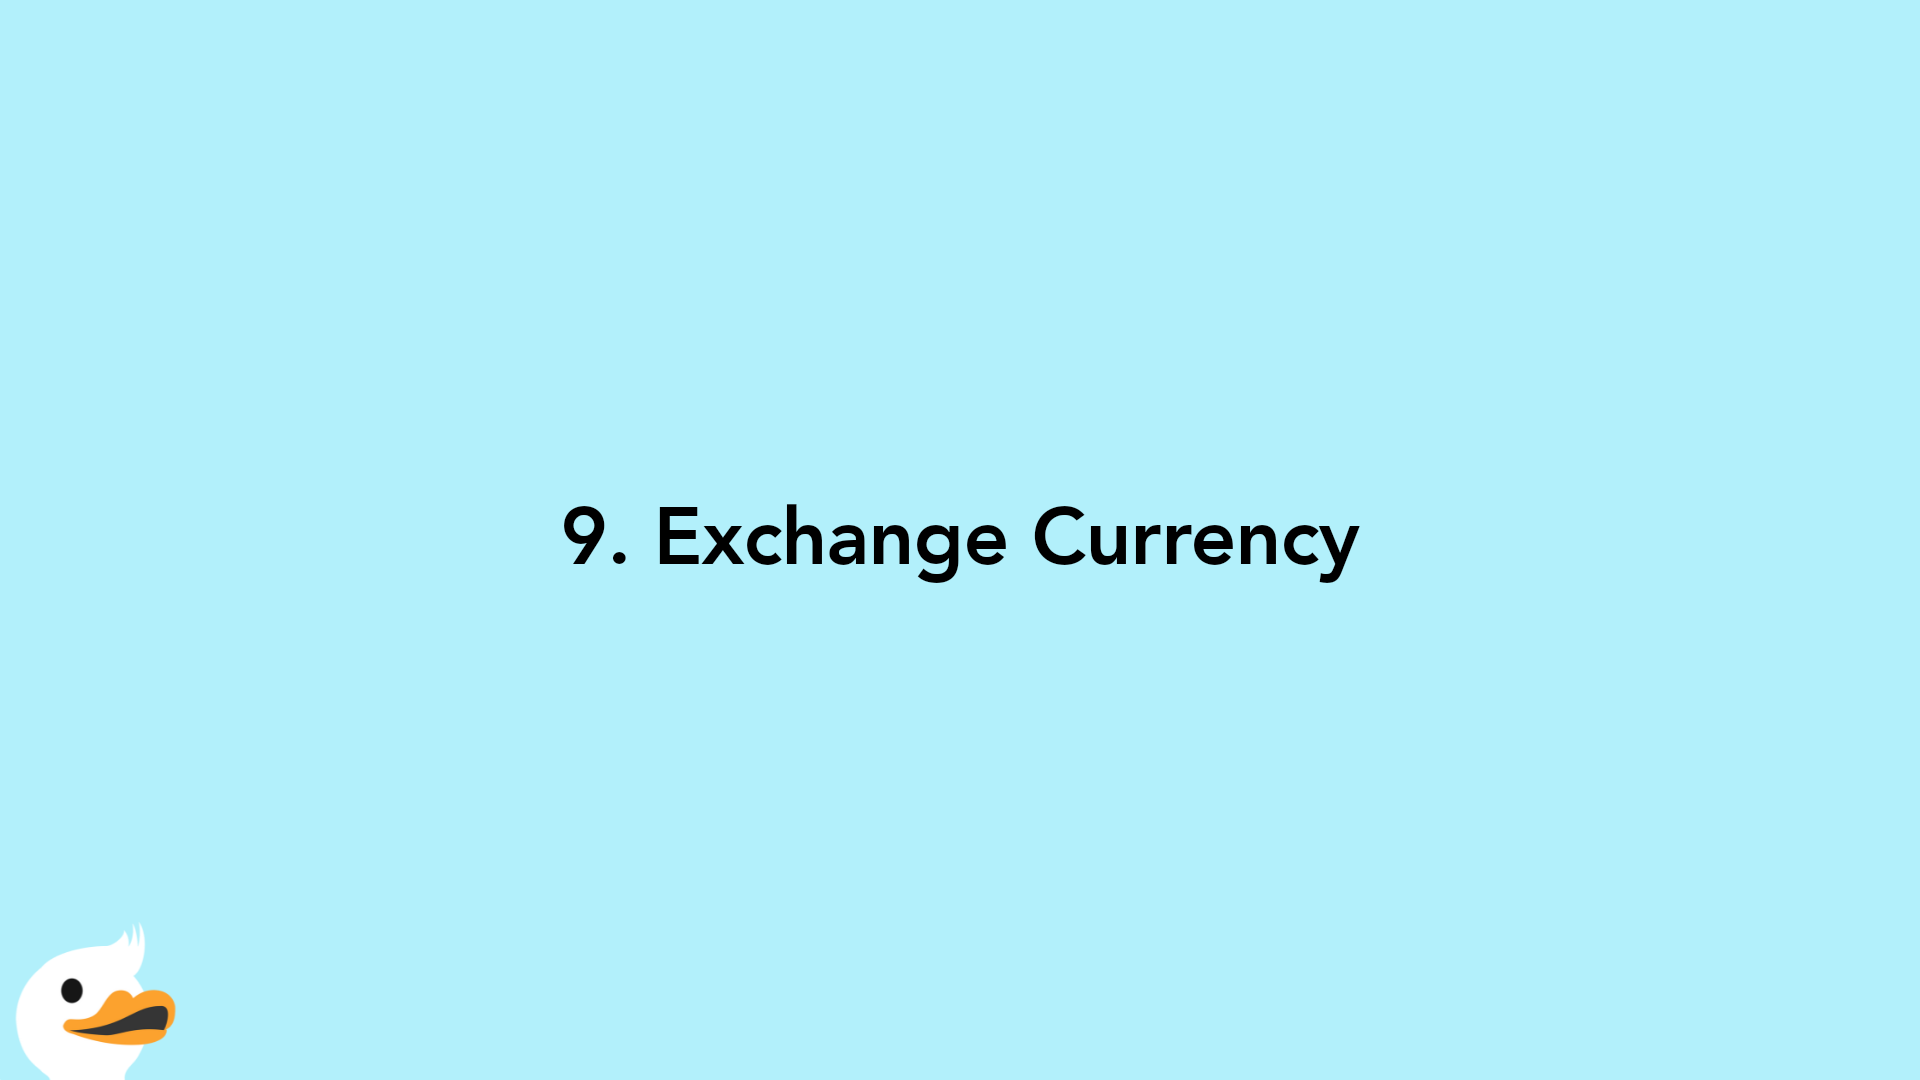 9. Exchange Currency